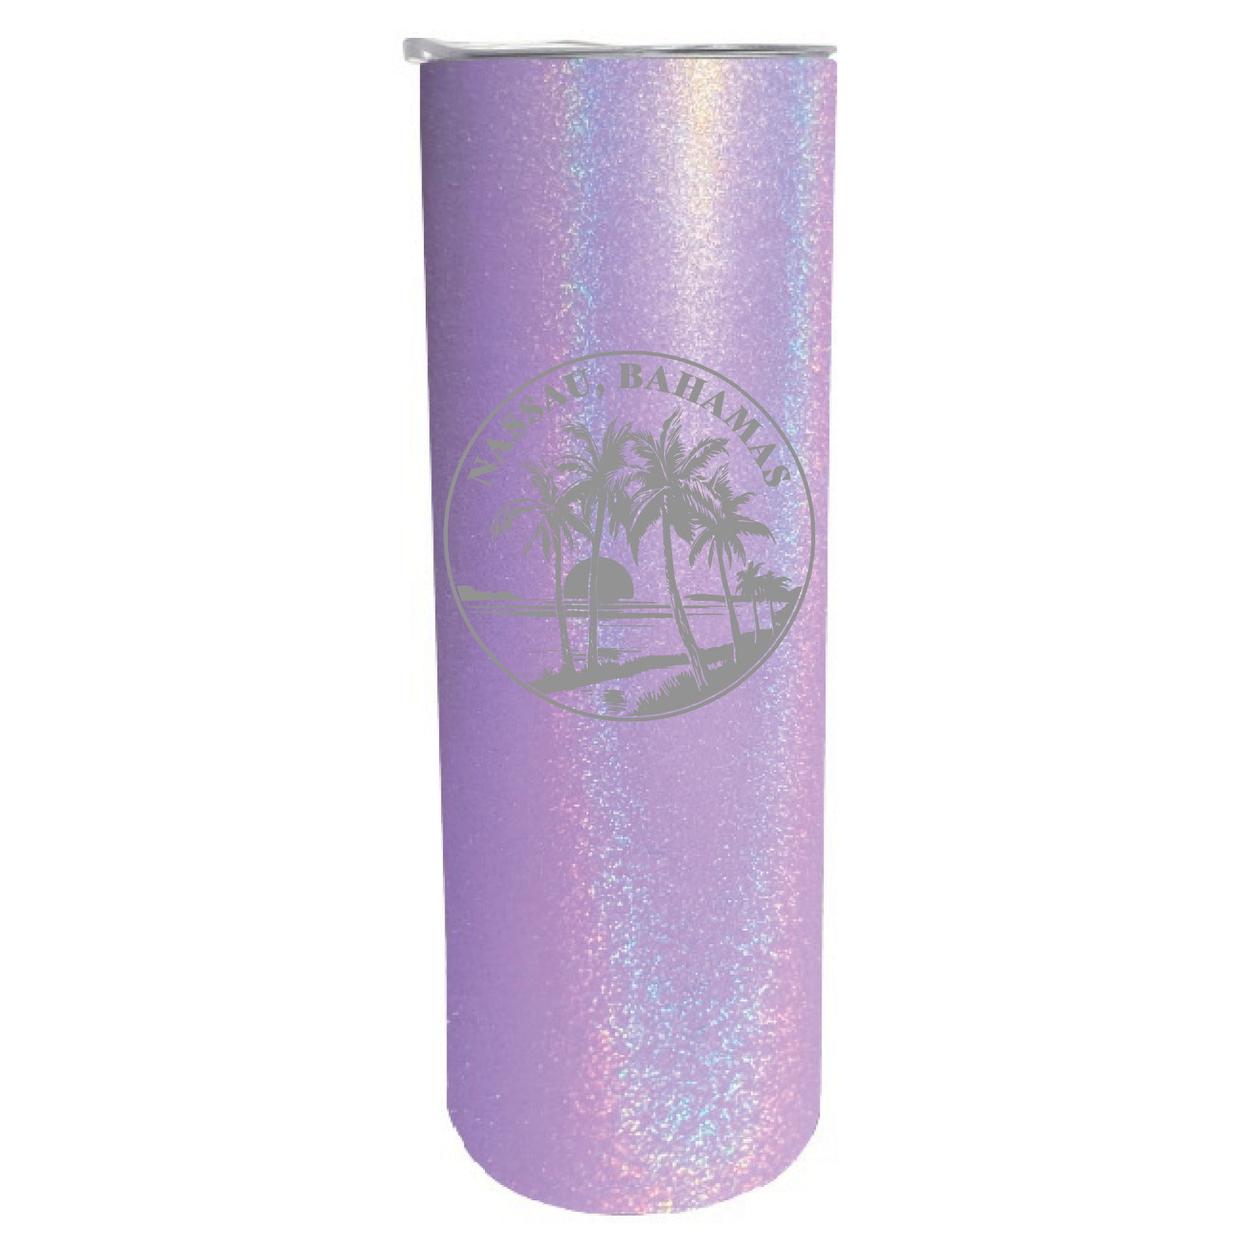 Nassau The Bahamas Souvenir 20 Oz Engraved Insulated Stainless Steel Skinny Tumbler - Navy,,4-Pack